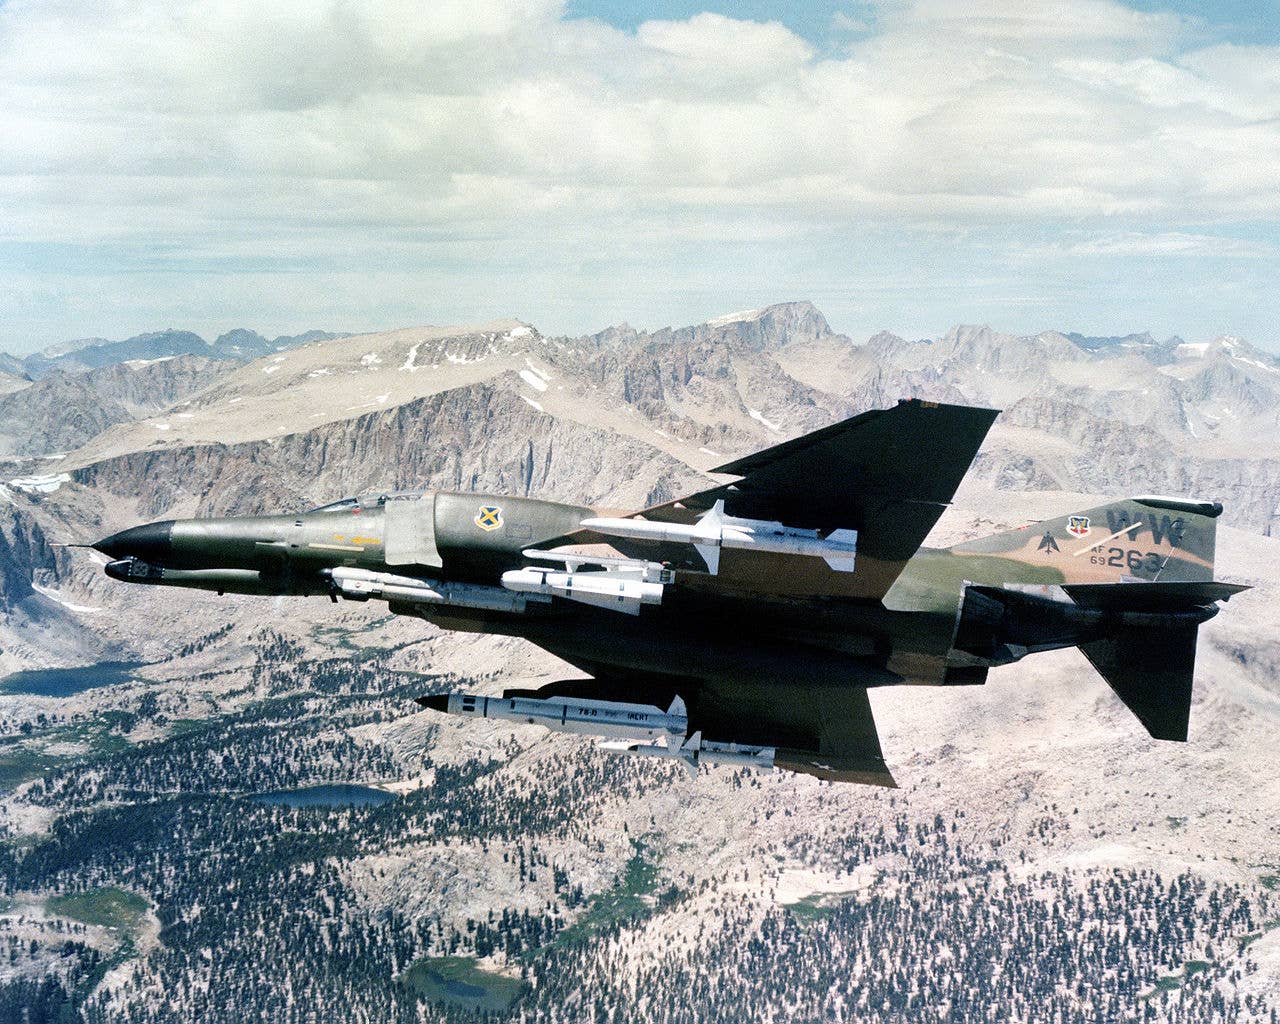 An F-4G Phantom II aircraft shows its undercarriage holding four different missiles: one each AGM-45, AGM-65, AGM-78, and AGM-88. (Wikimedia Commons)